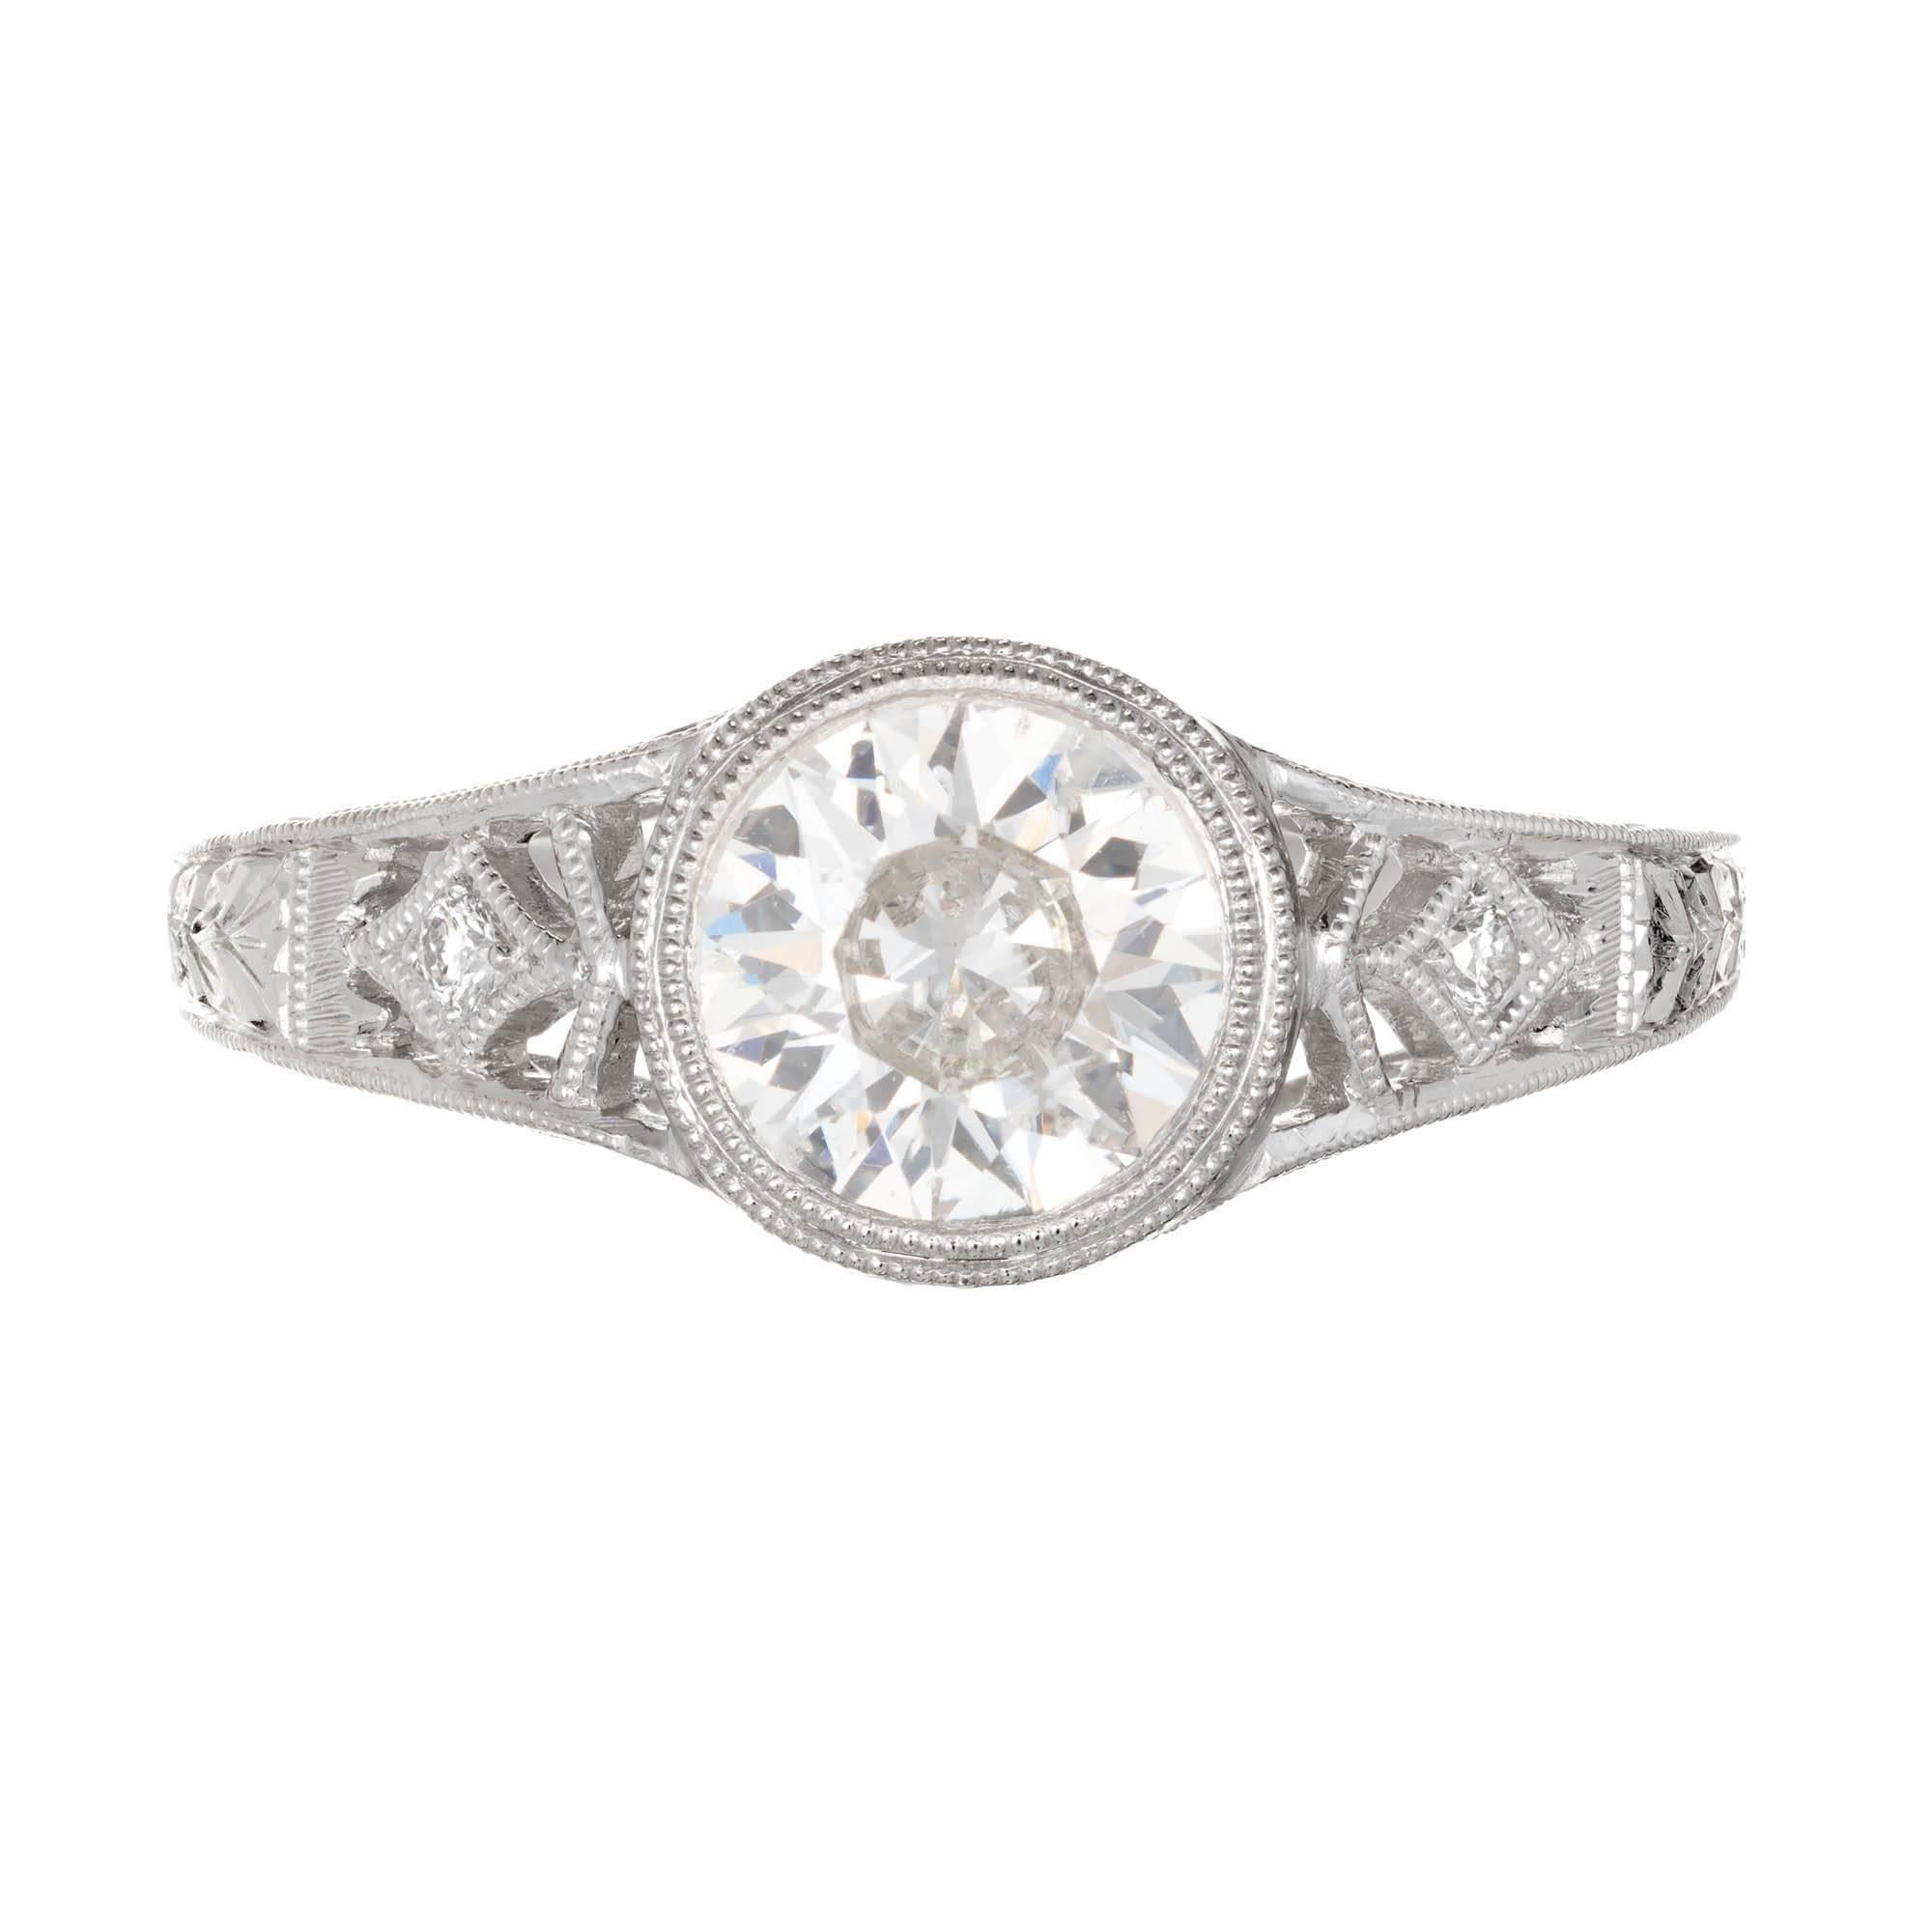 Old European round brilliant cut diamond engagement ring. Set in a filigree platinum setting. GIA certified.

1 old European diamond, approx. total weight 1.01cts, H, SI2, GIA certificate #2165523641
2 round diamonds, approx. total weight